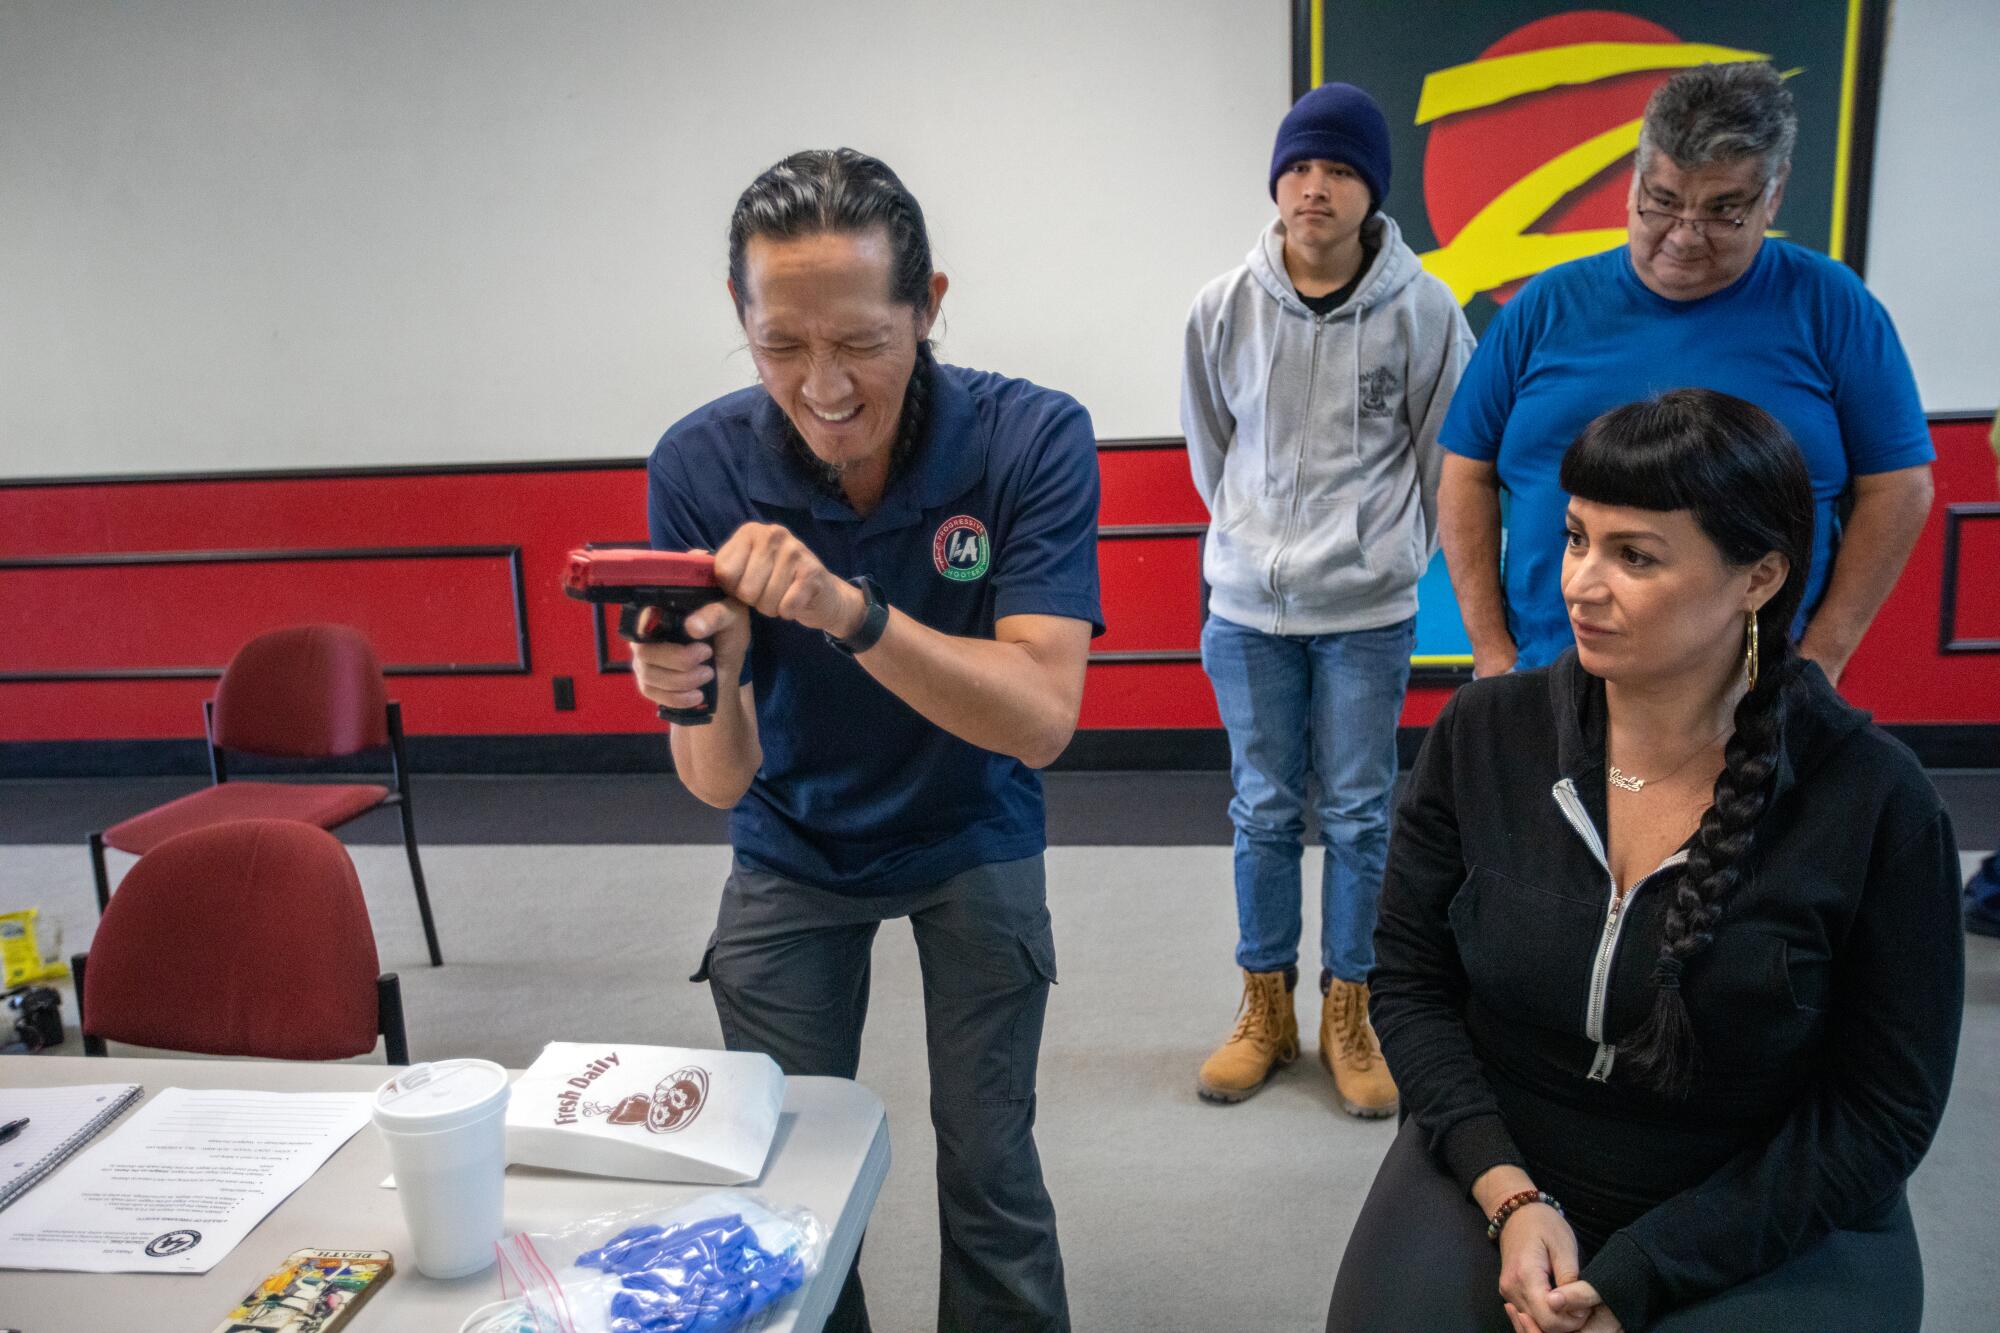 Tom Nguyen, left, grips a Glock replica as three students look on